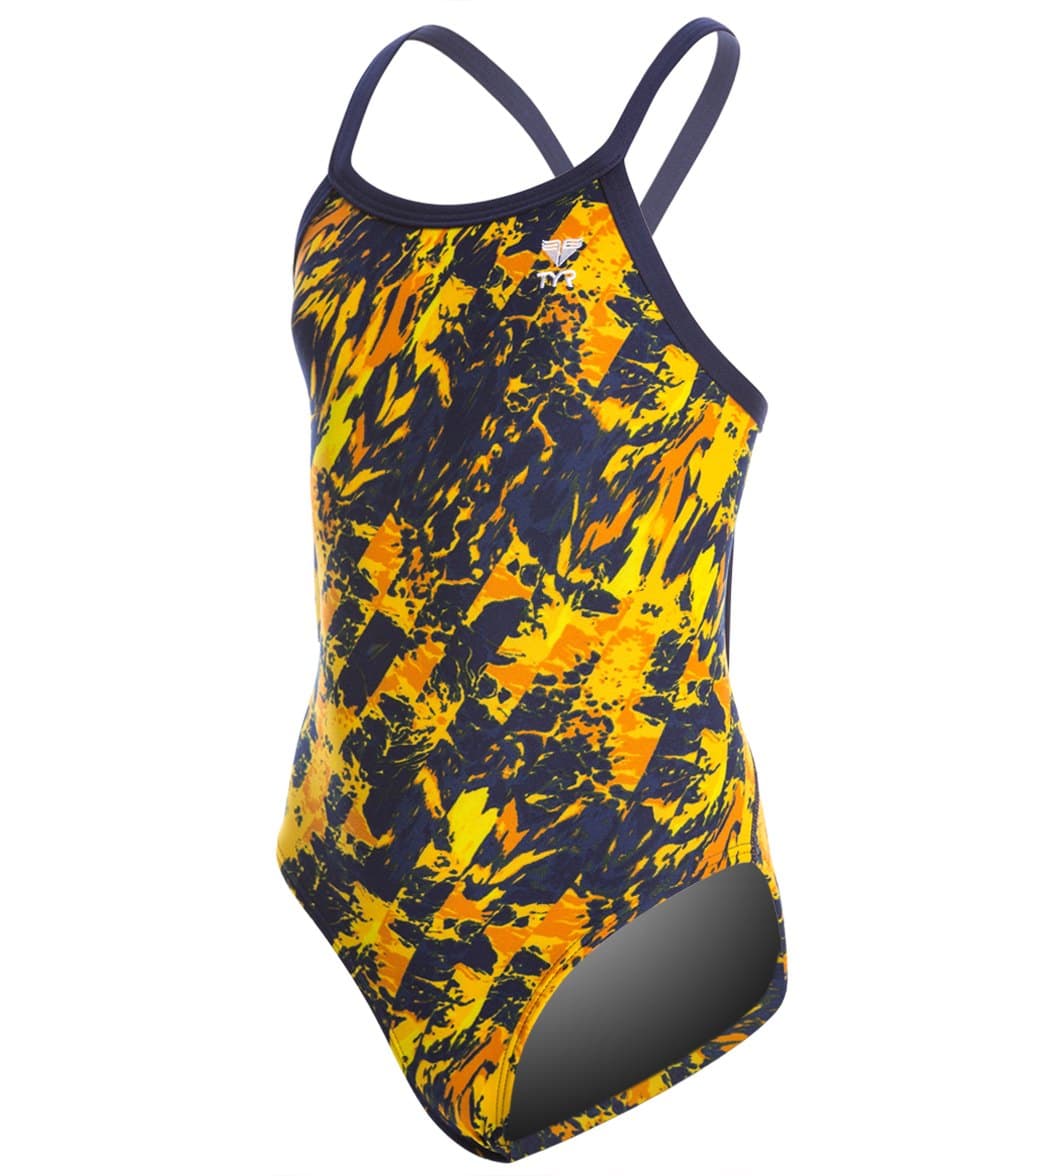 TYR Youth Glisade Diamondfit One Piece Swimsuit - Navy/Gold 22 - Swimoutlet.com